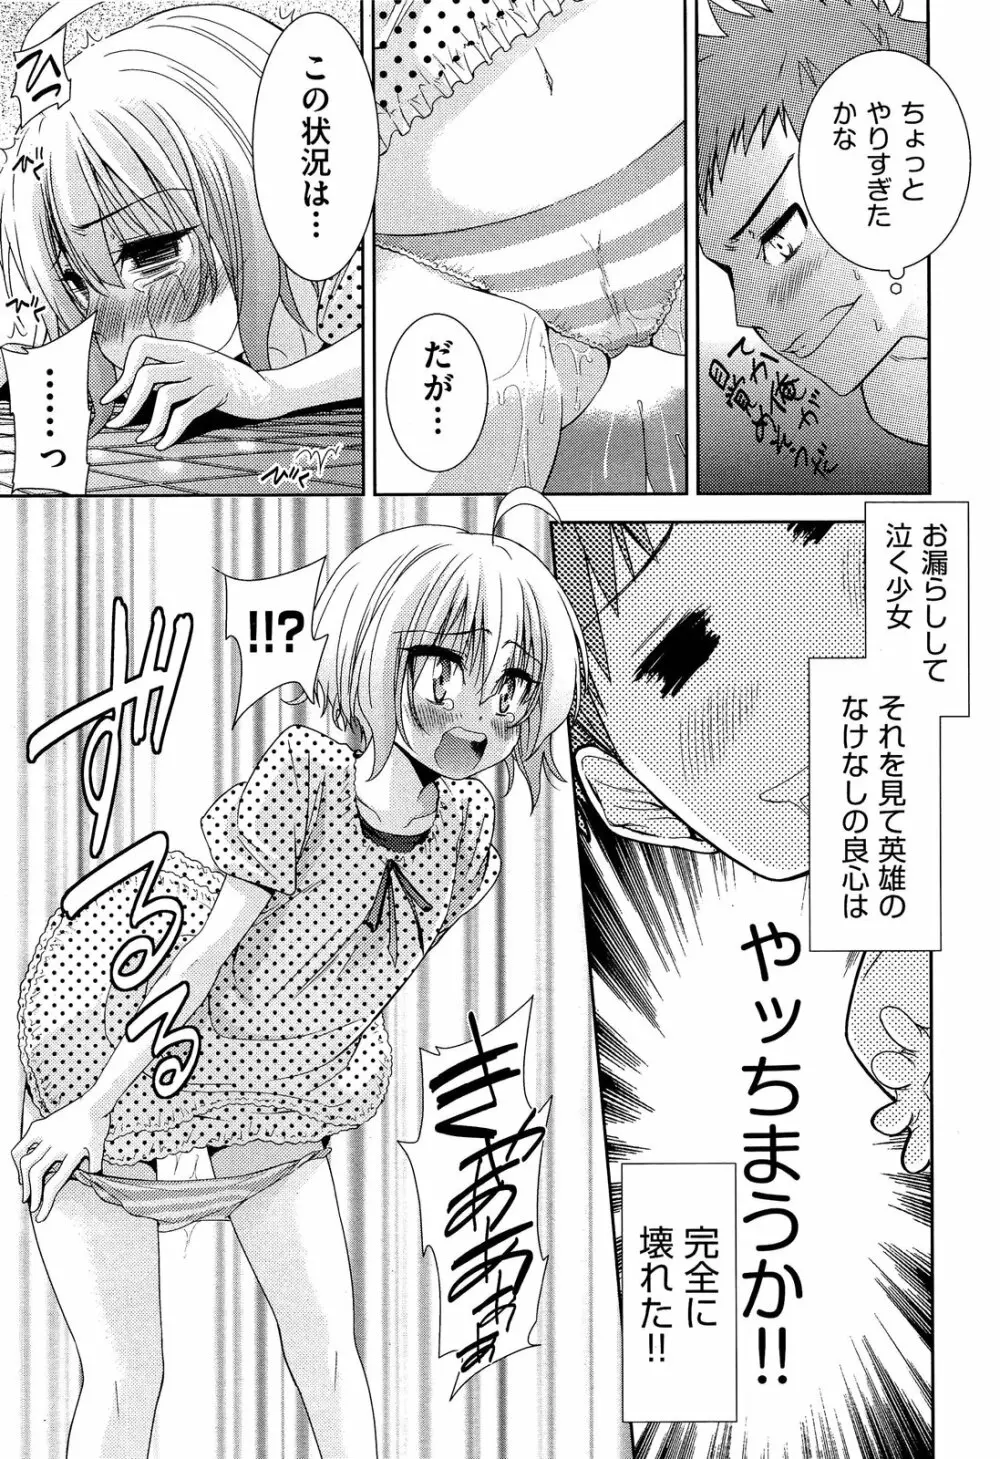 Two dimensions girlfriend Ch.1-4 37ページ